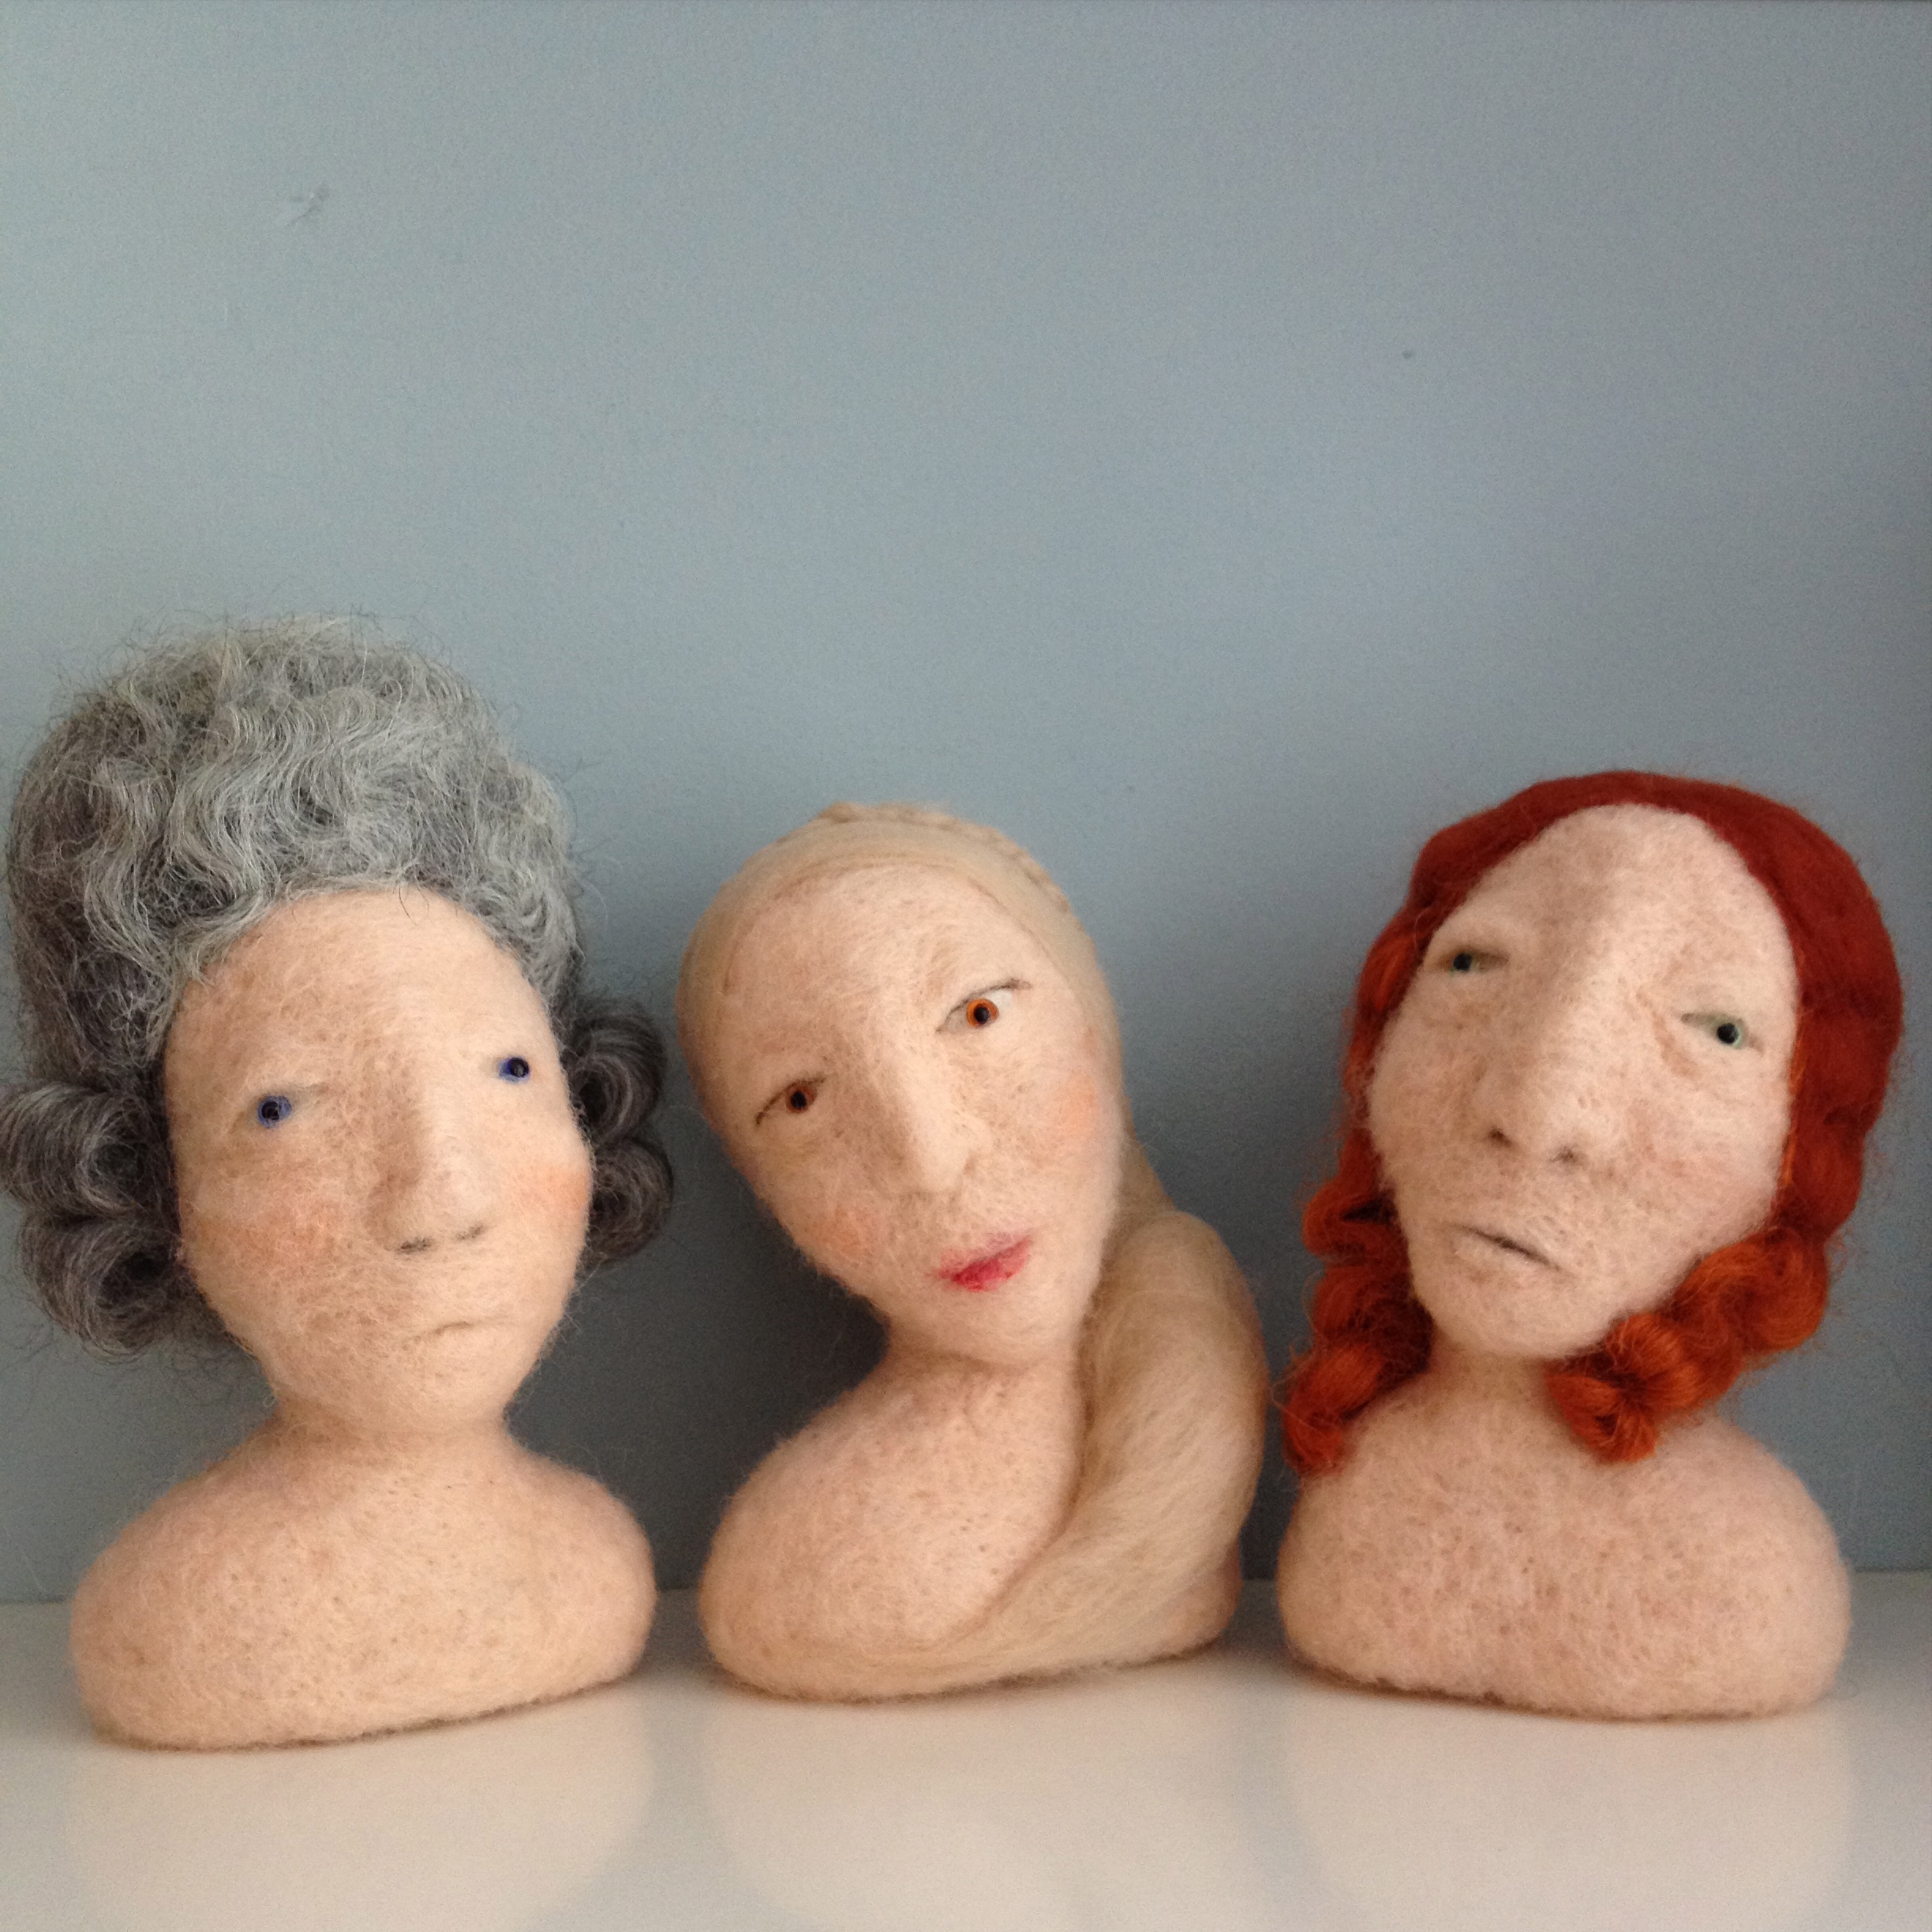 Historical doll series 2014